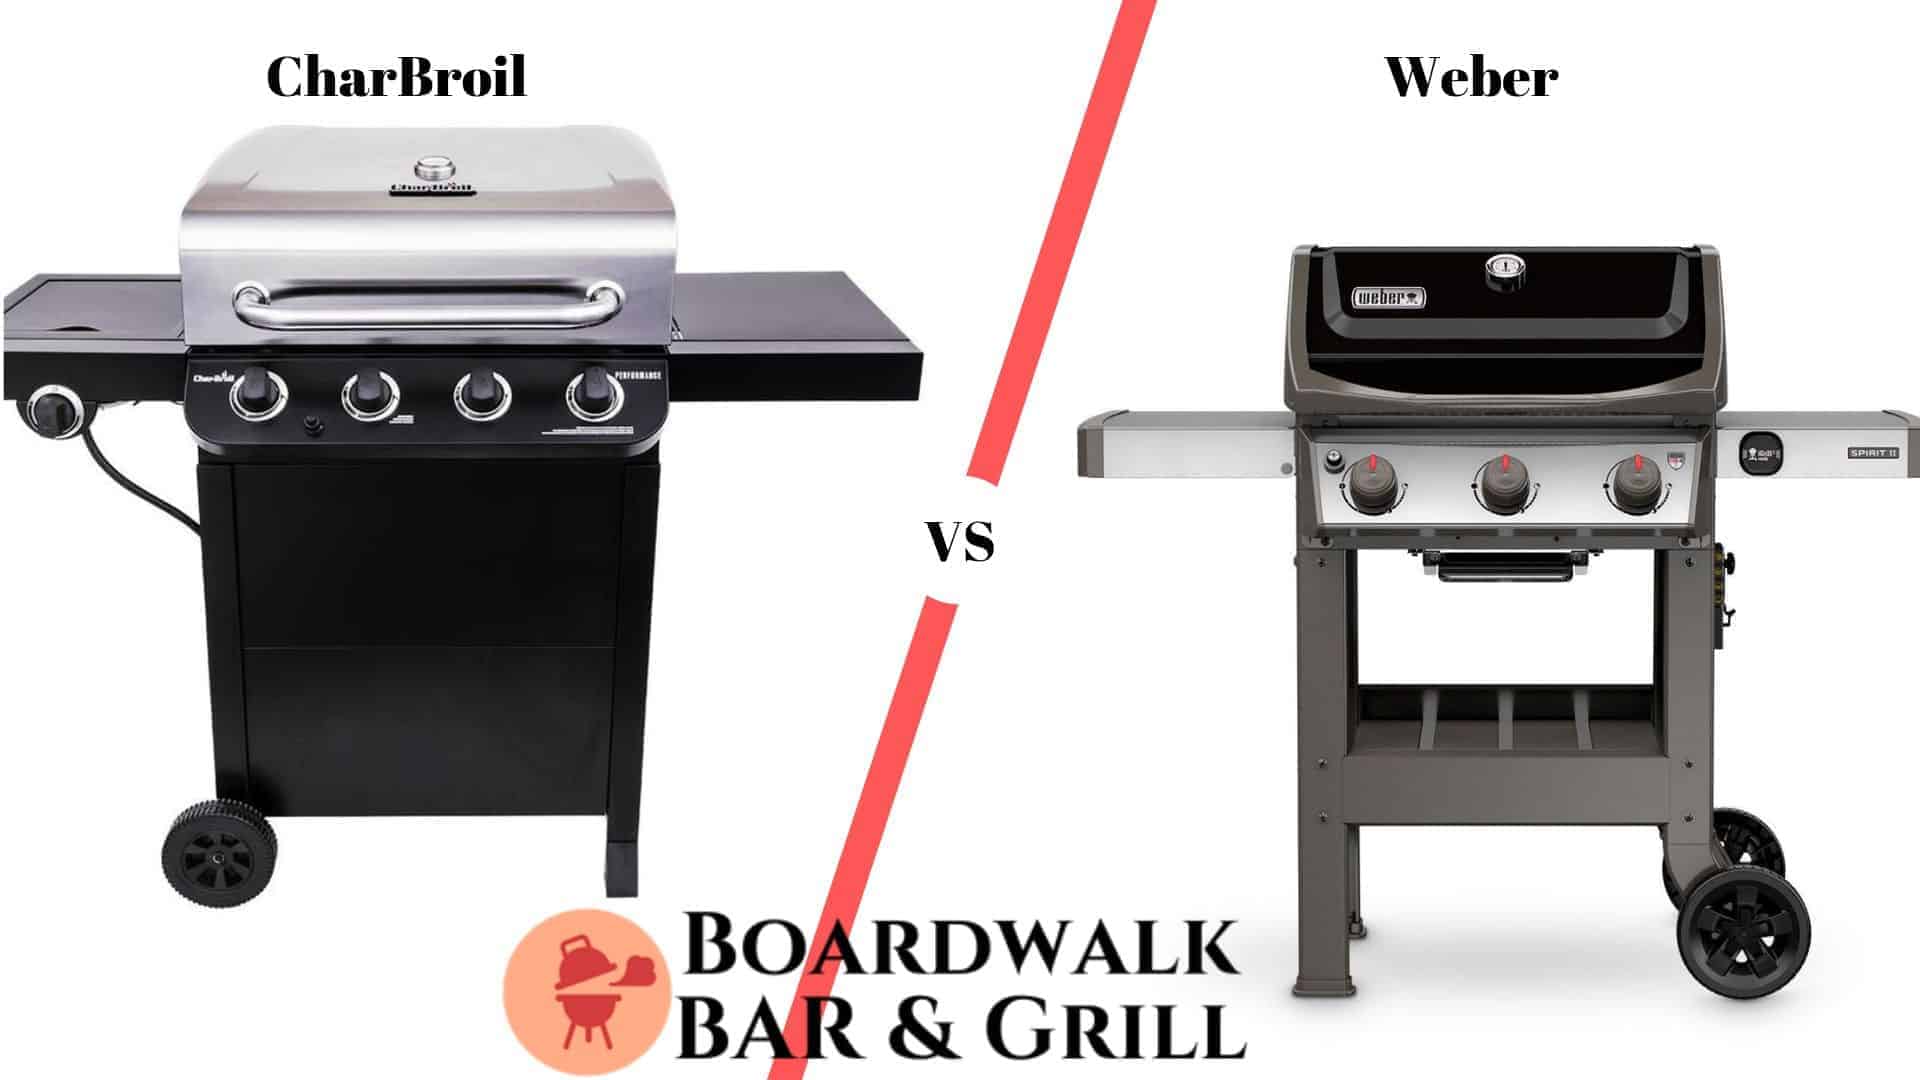 Char Broil Vs Weber Gas Grills Ratings Reviews Smokey Grill Bbq,Severe Macaw Chestnut Fronted Macaw